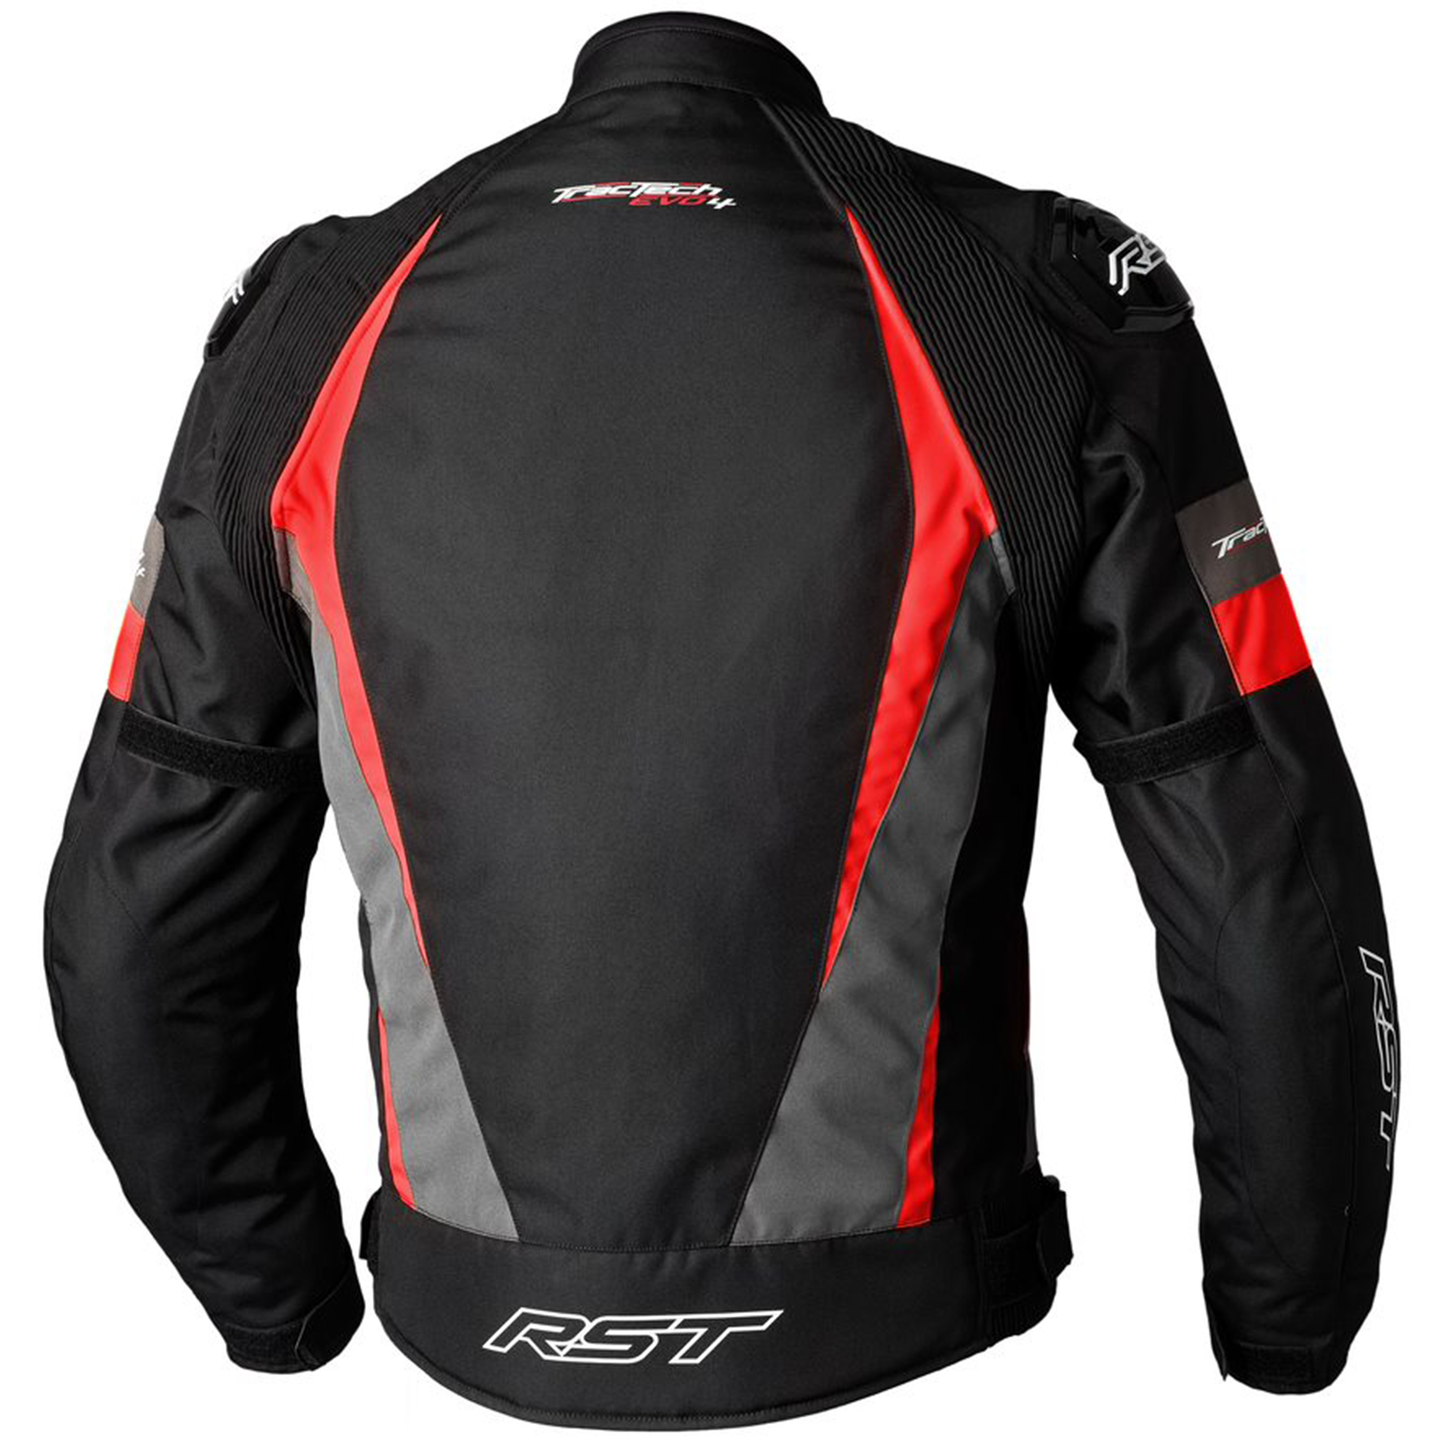 RST Tractech Evo 4 CE Mens Textile Jacket - Black/Grey/Flo Red (2365 ...